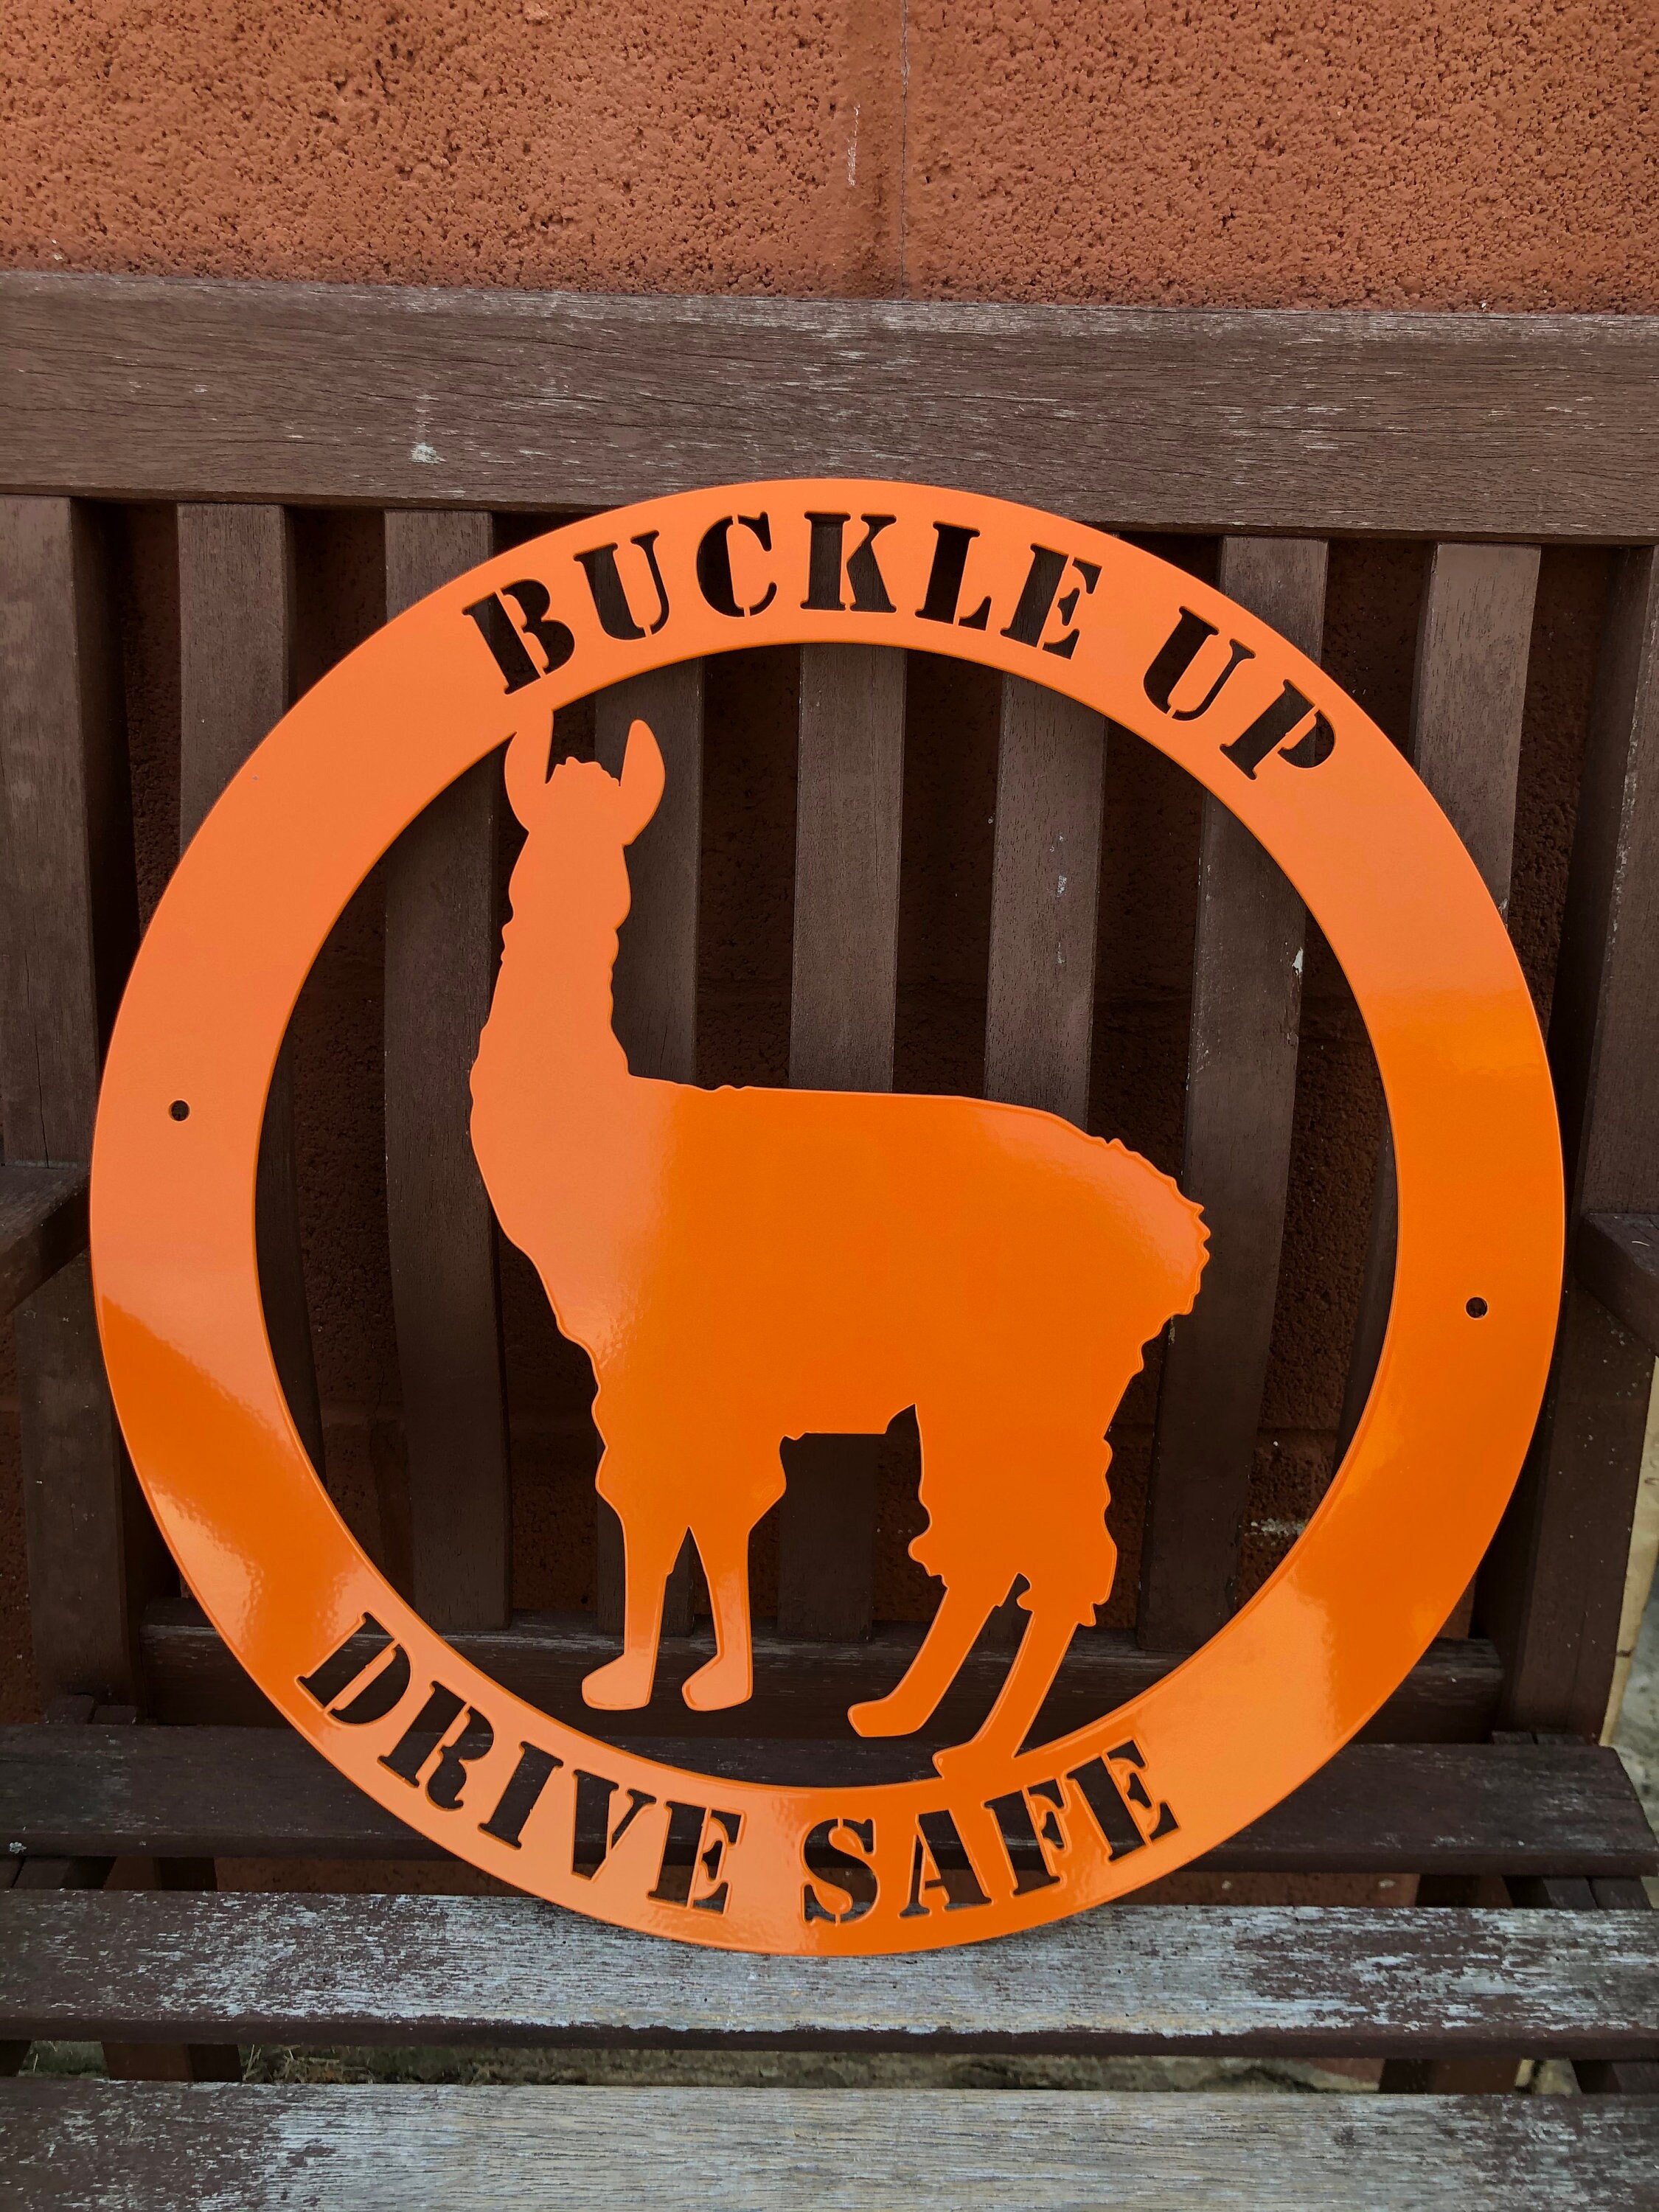 Buckle Up Signs - Driving Safety Signs